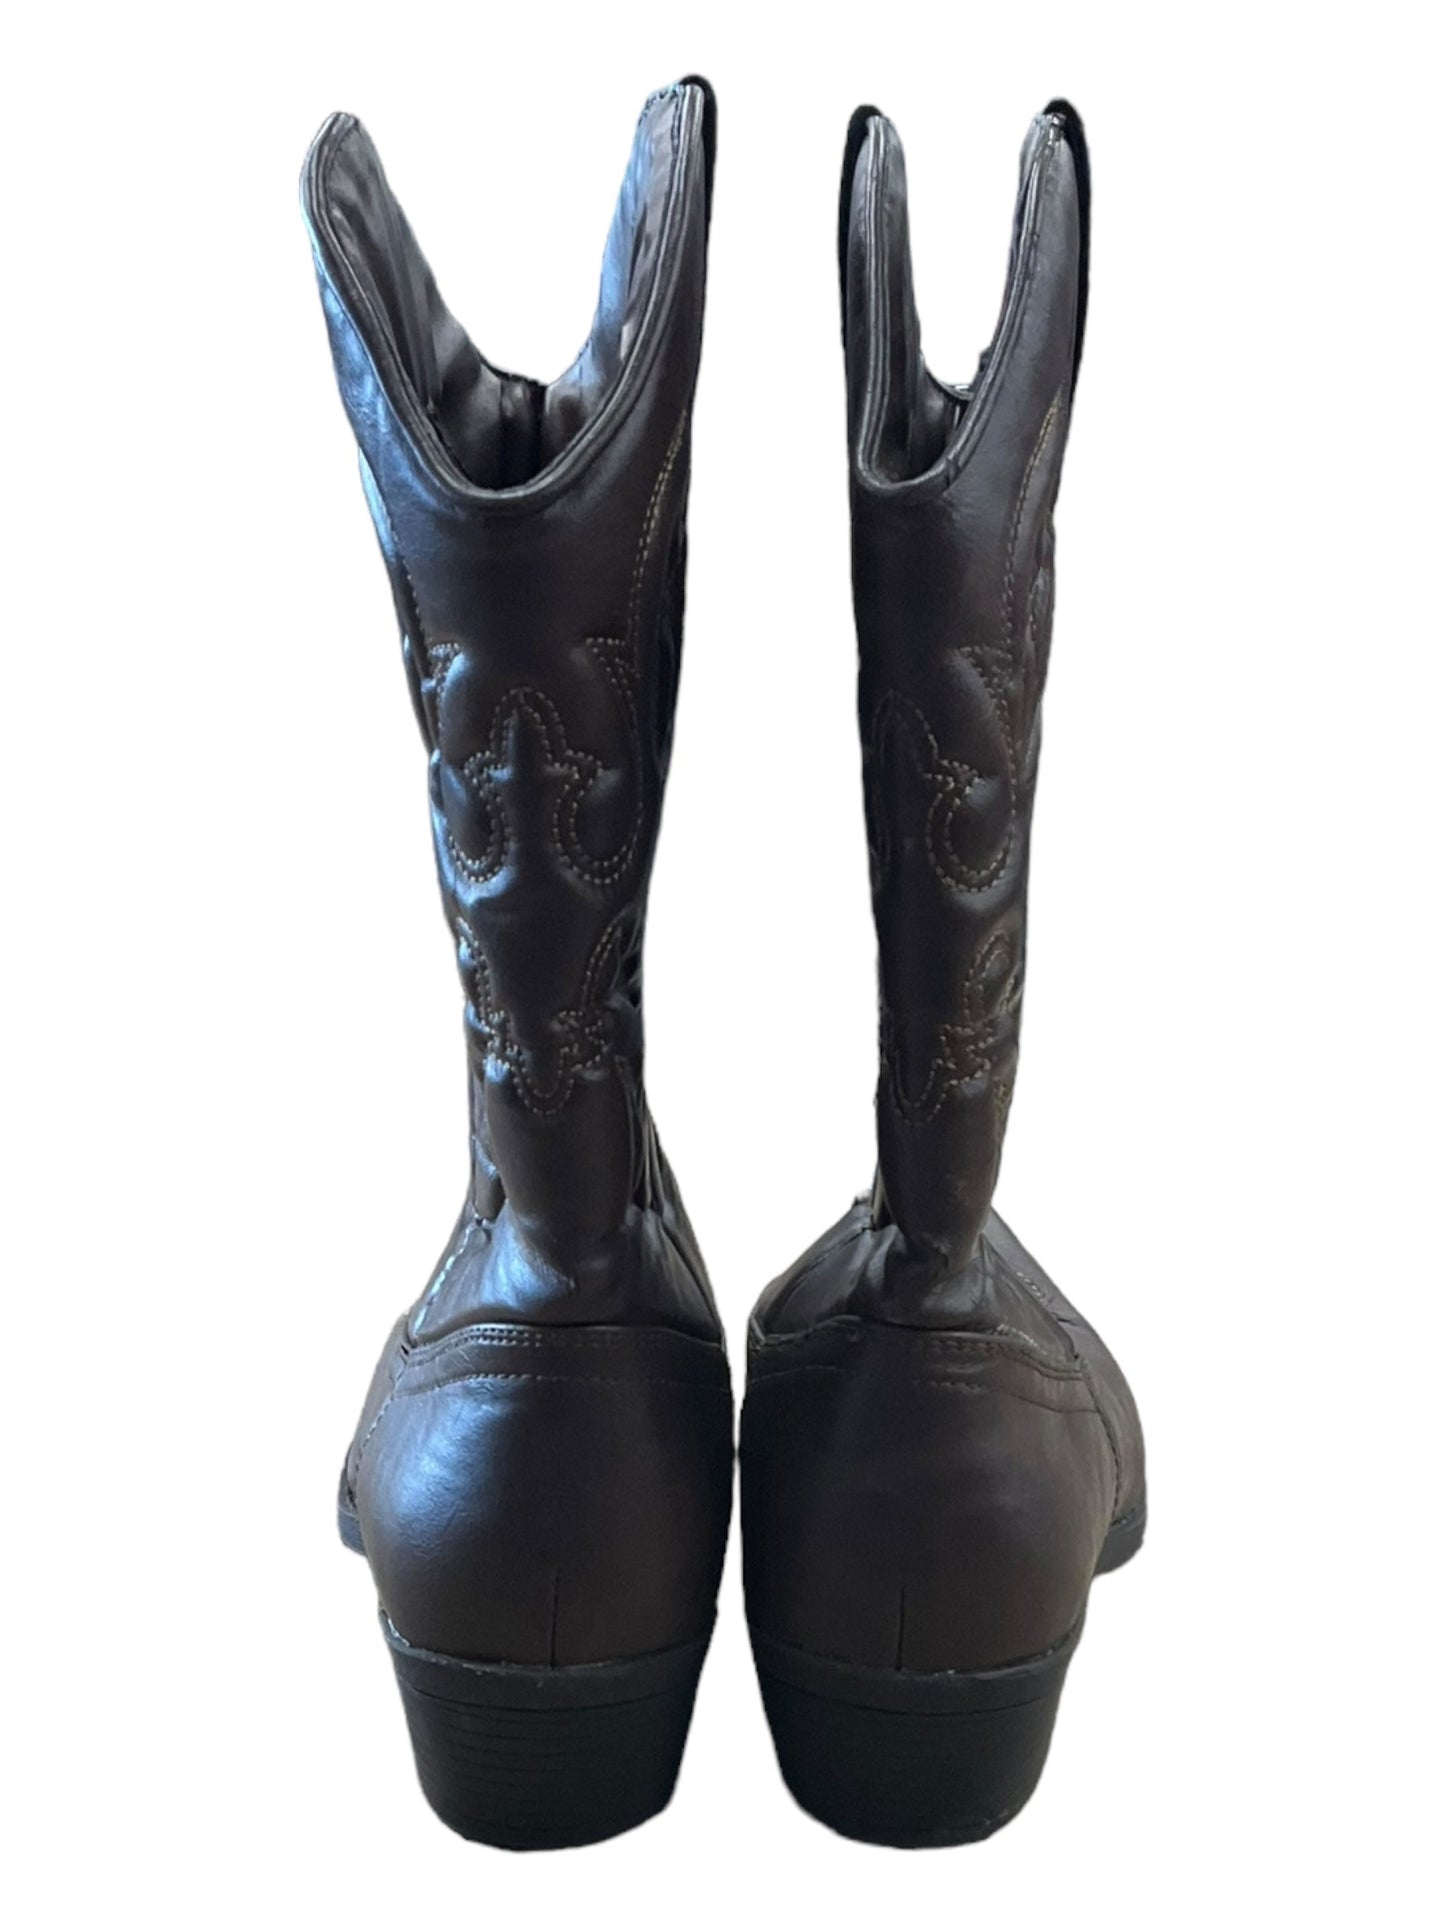 Boots Western By Mossimo  Size: 7.5